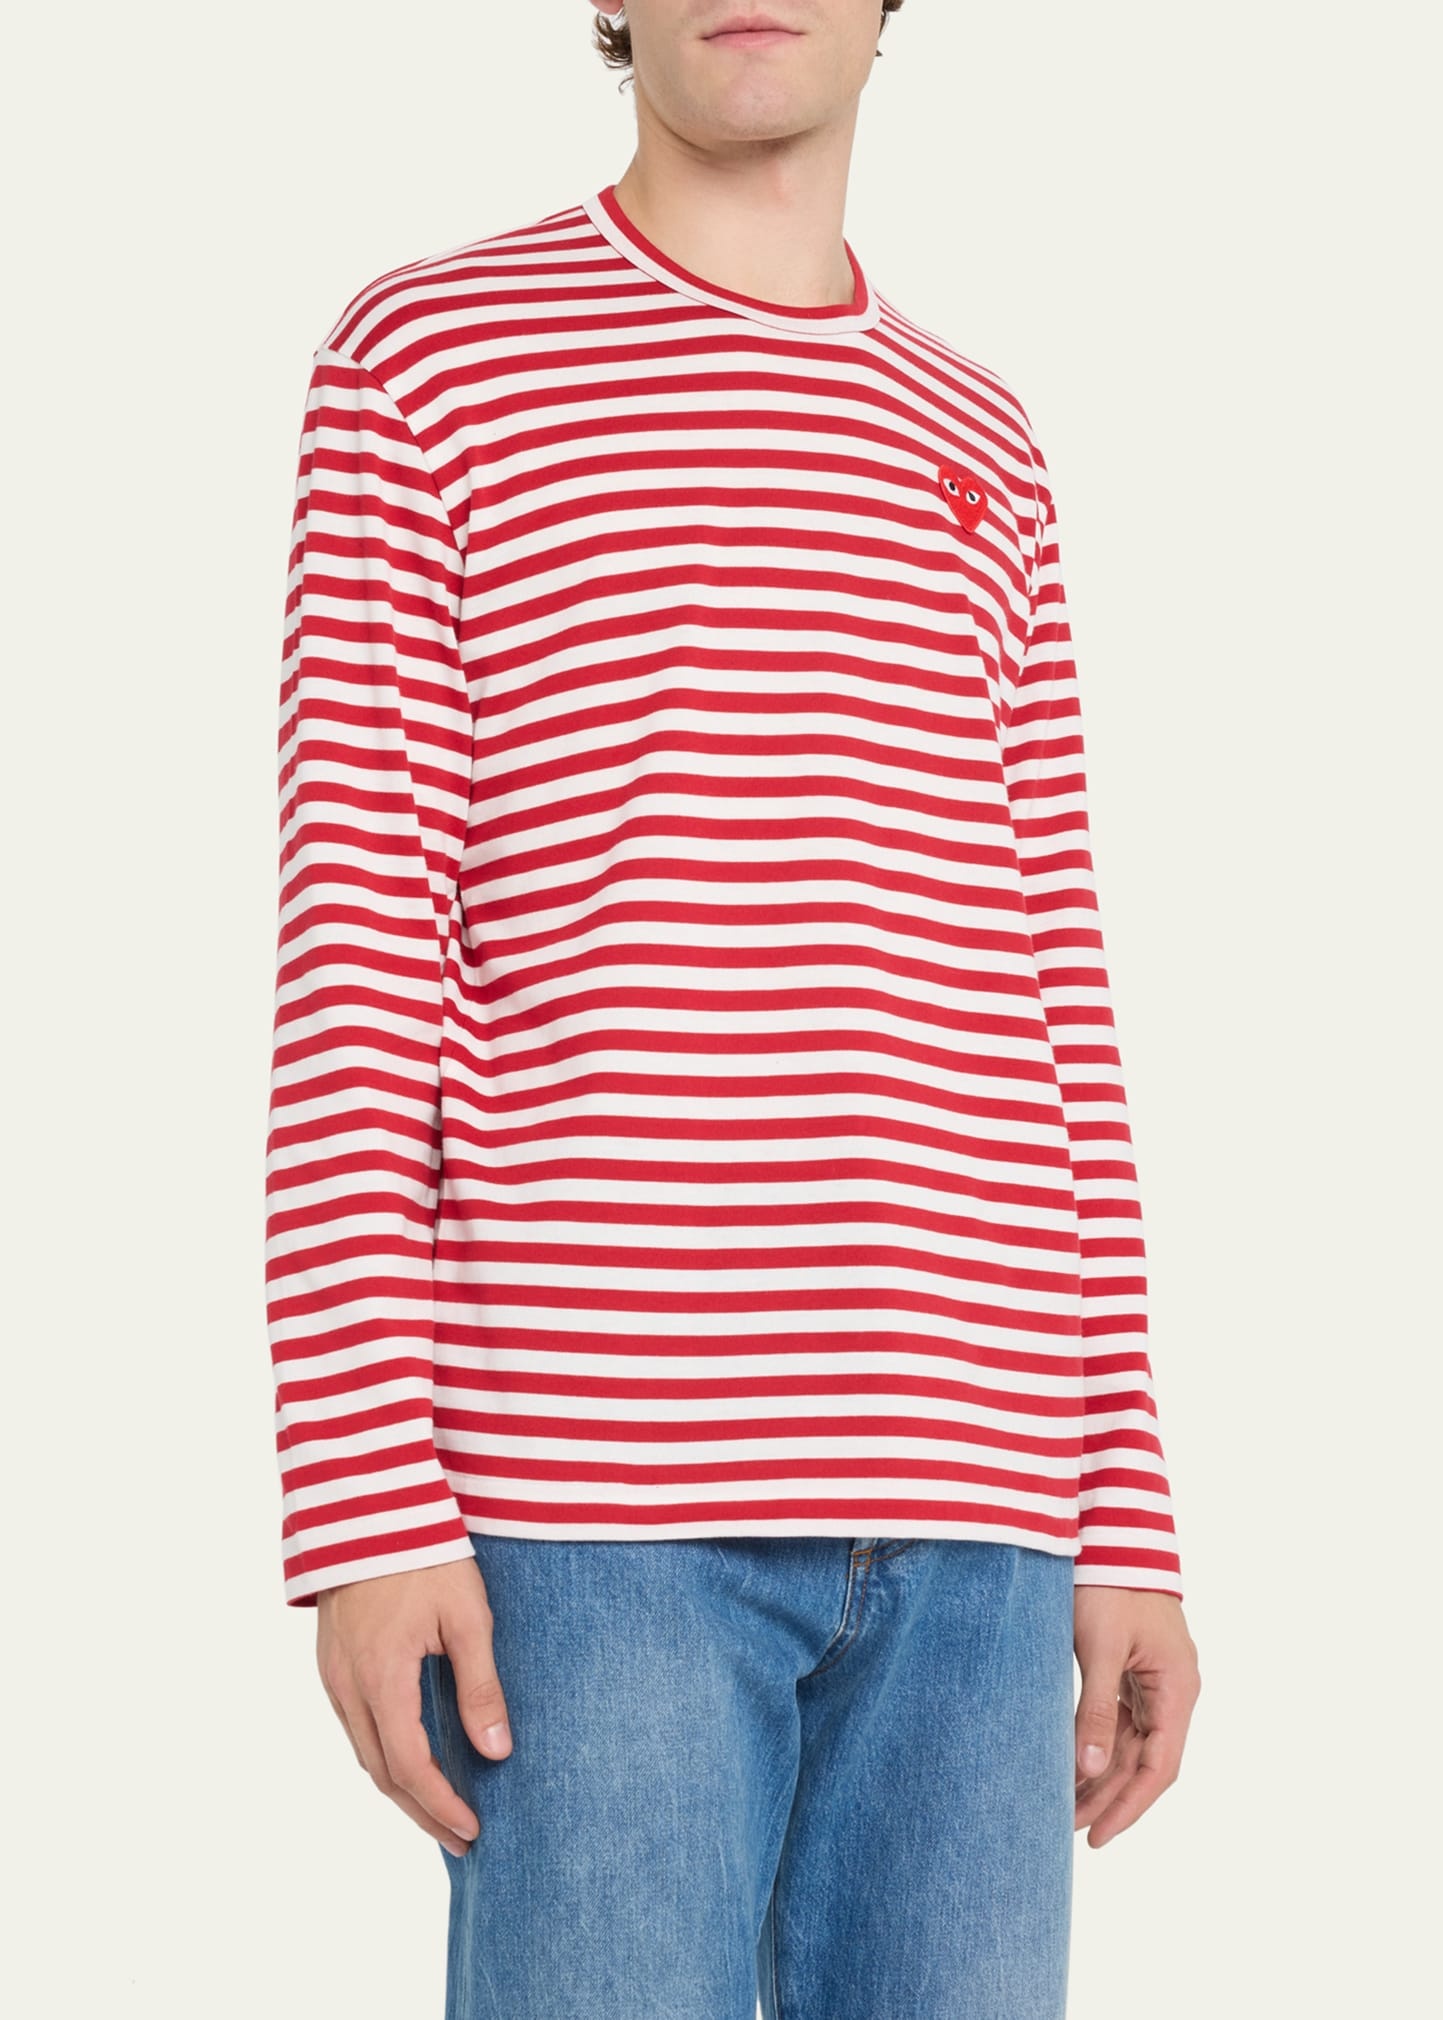 Men's Striped T-Shirt with Small Heart - 4